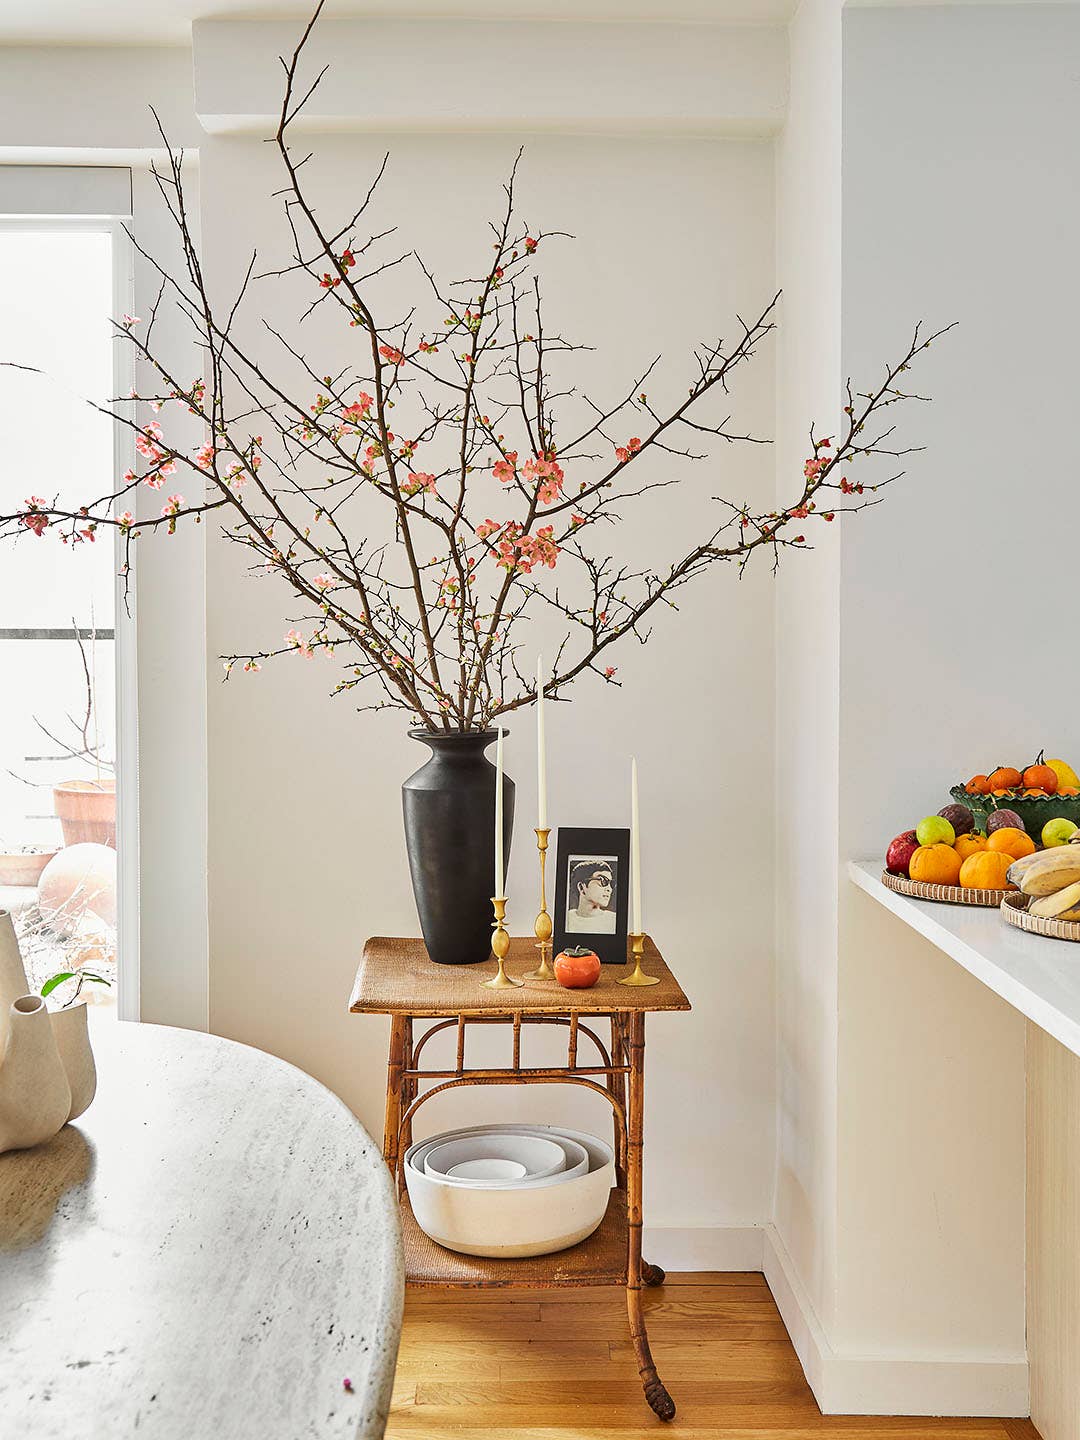 Before Tackling a Dramatic Branch Arrangement, You’ll Need the Right Vase